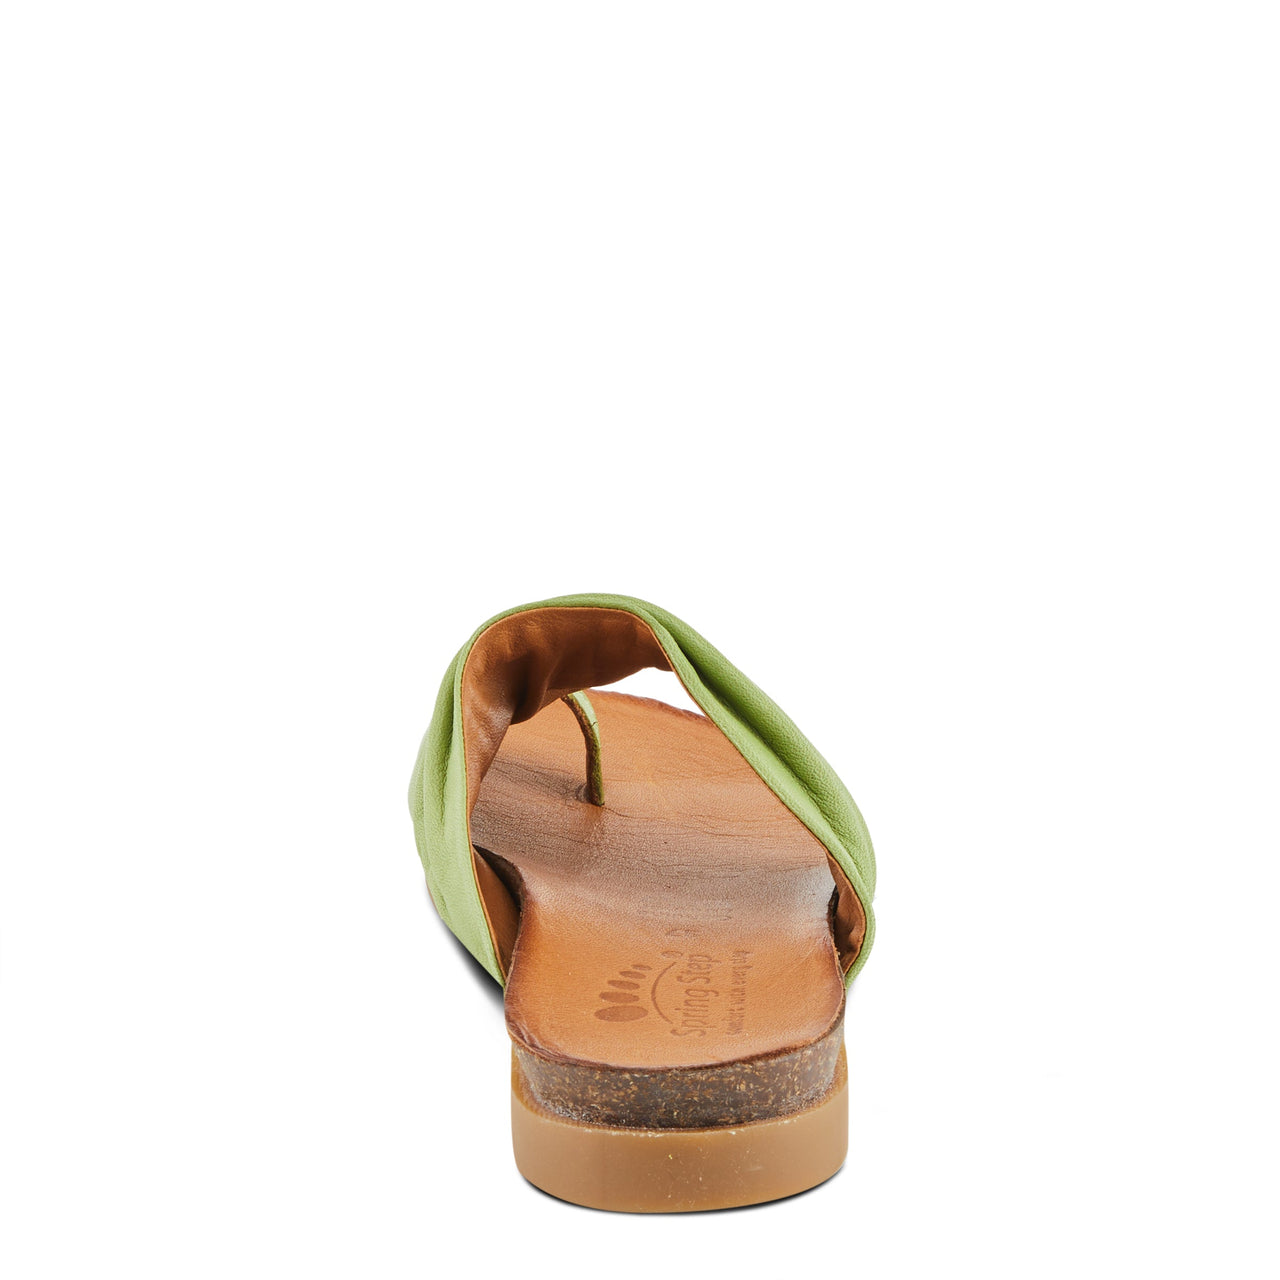 Brown leather Spring Step Bates sandals with cushioned insoles and adjustable straps